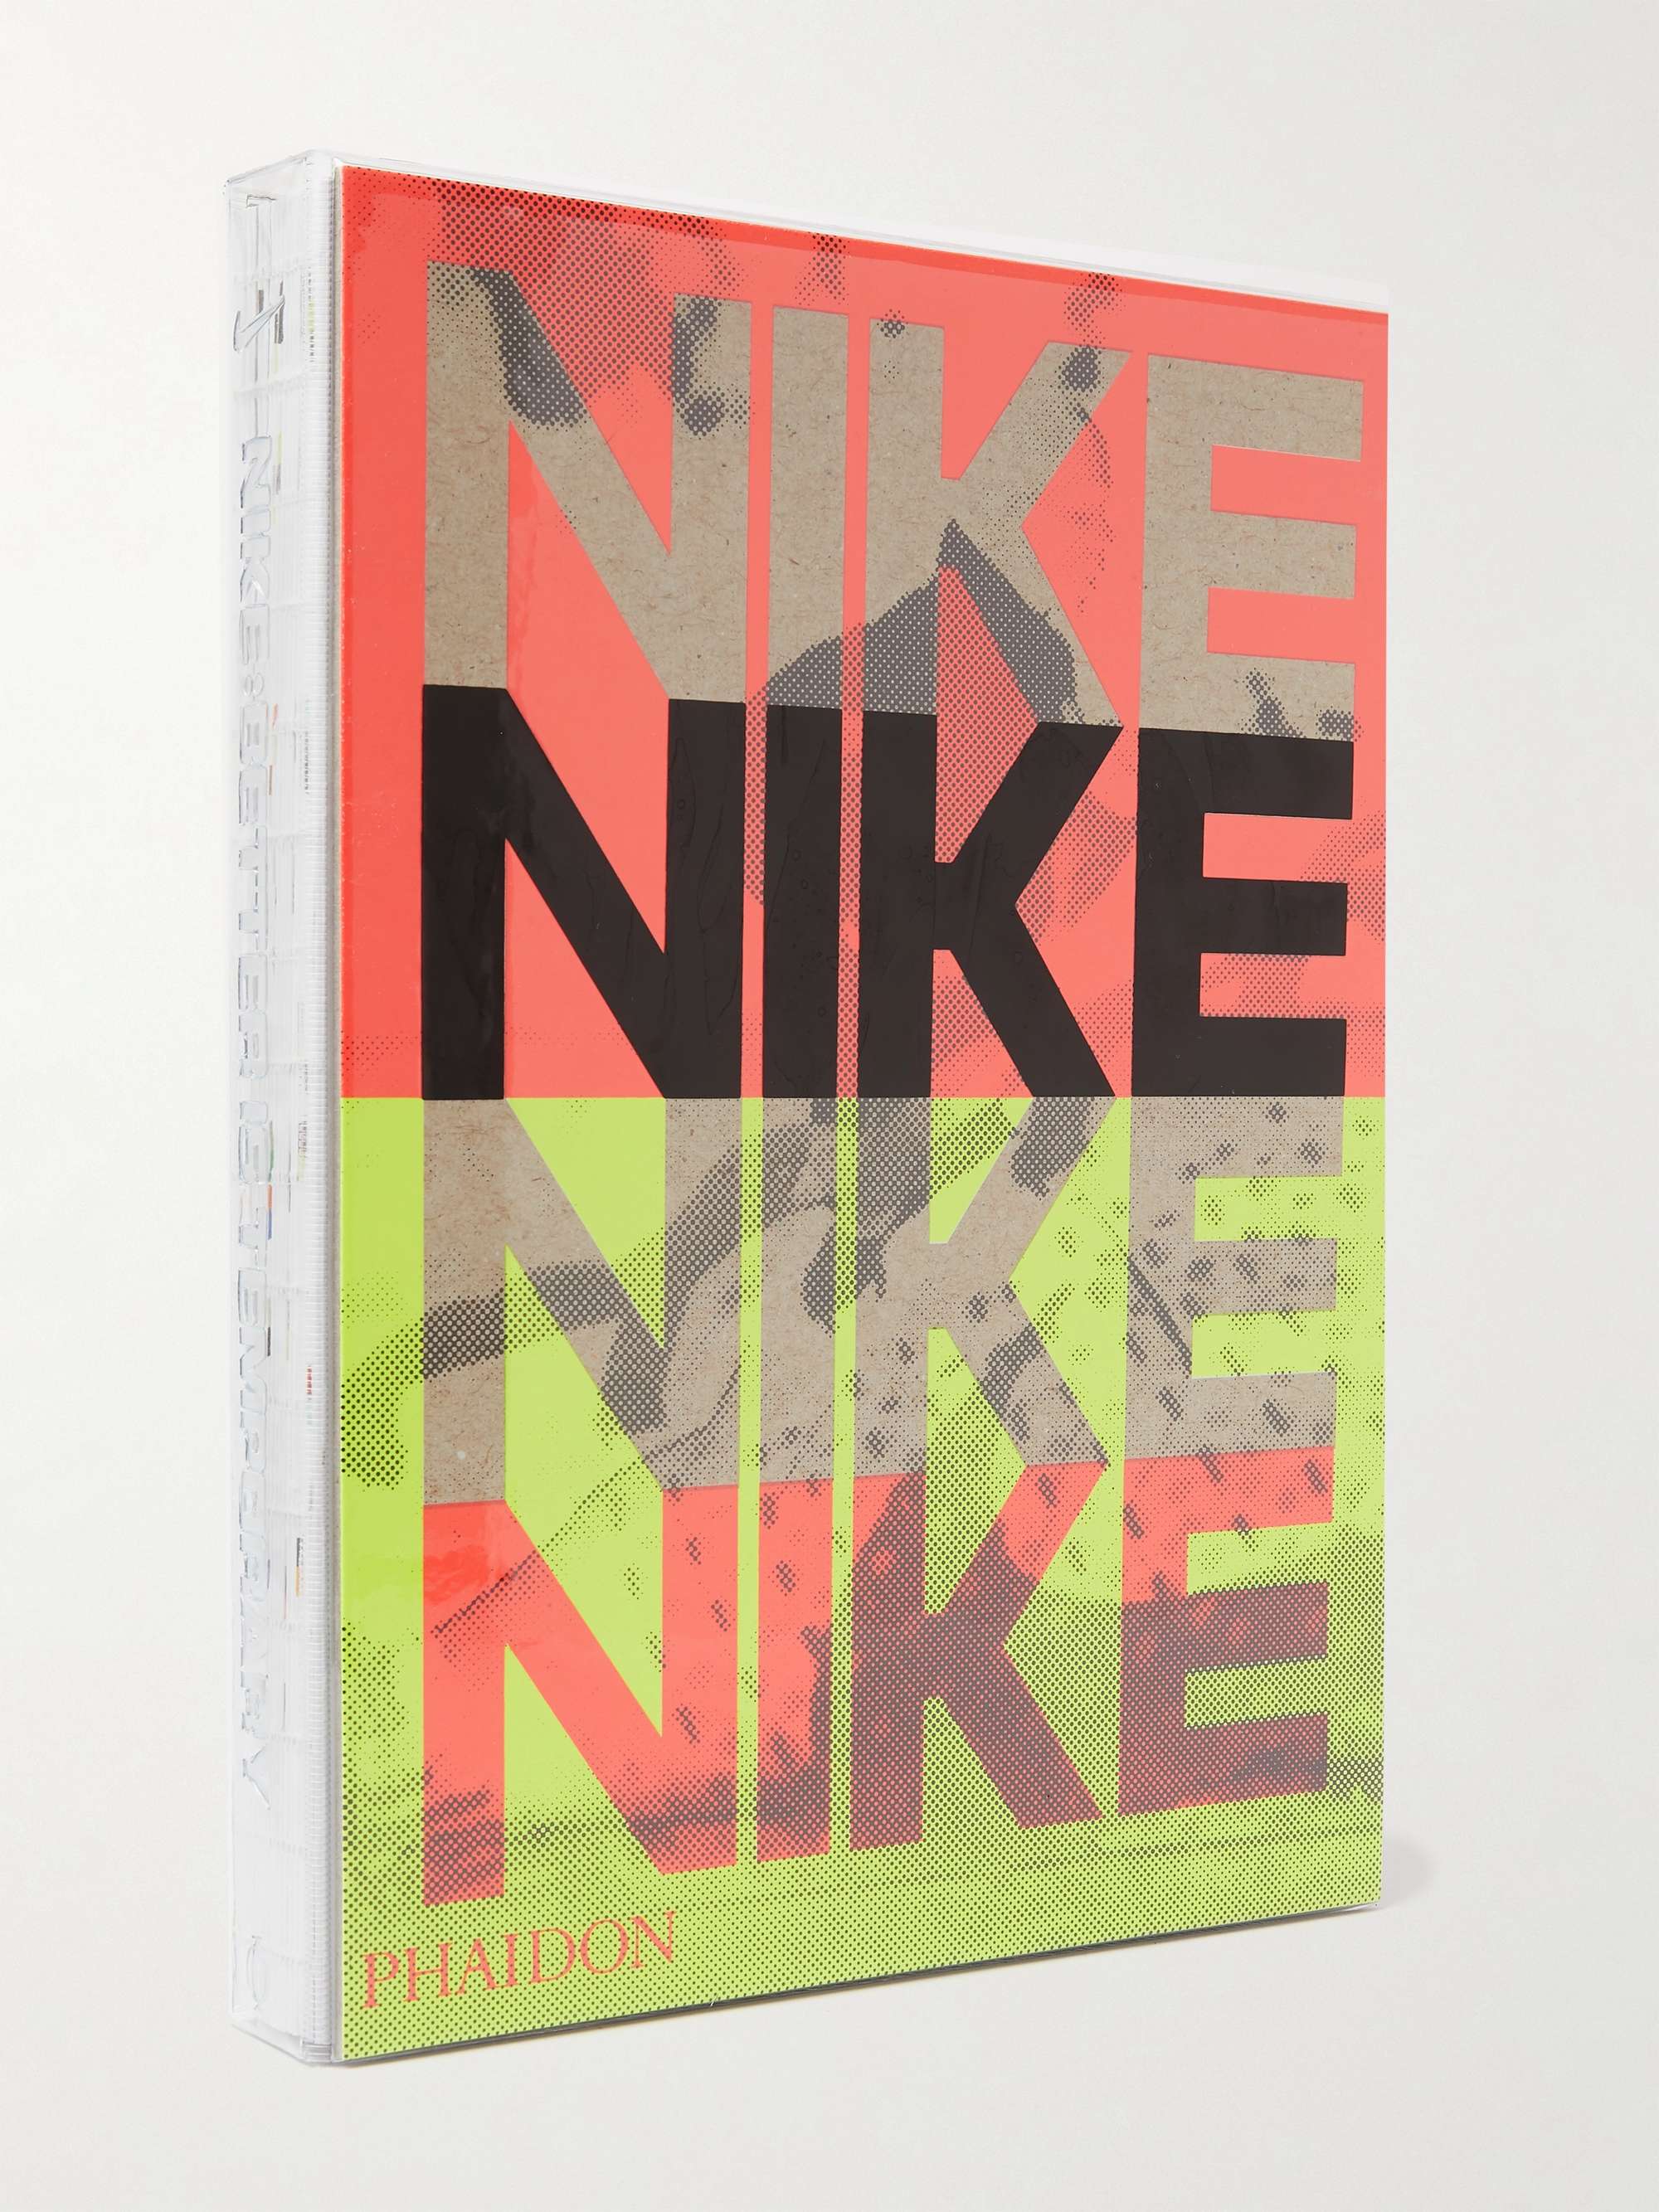 PHAIDON Nike: Better is Temporary Hardcover Book